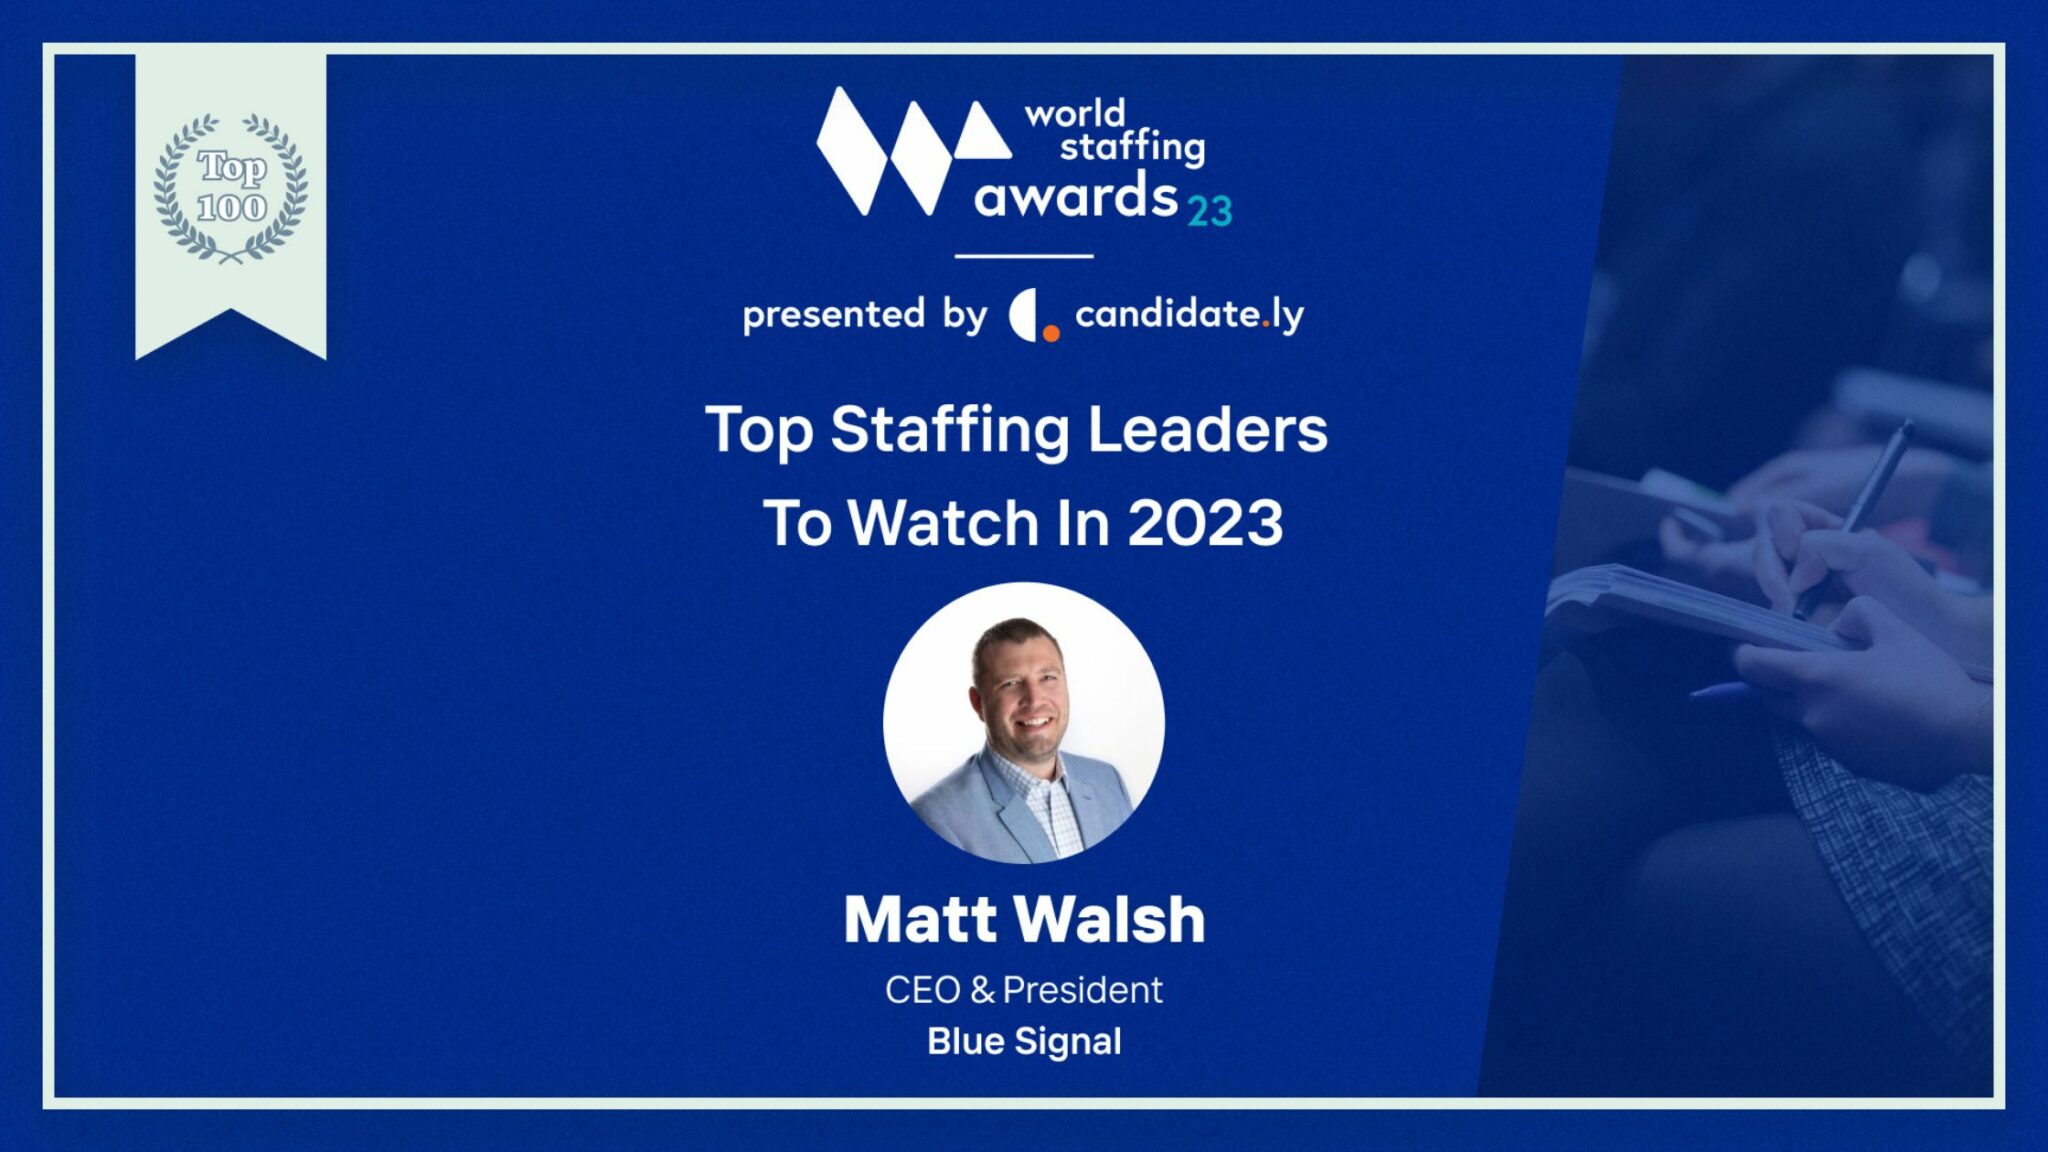 World Staffing Awards 2023 Top Staffing Leaders to Watch certificate for Matt Walsh